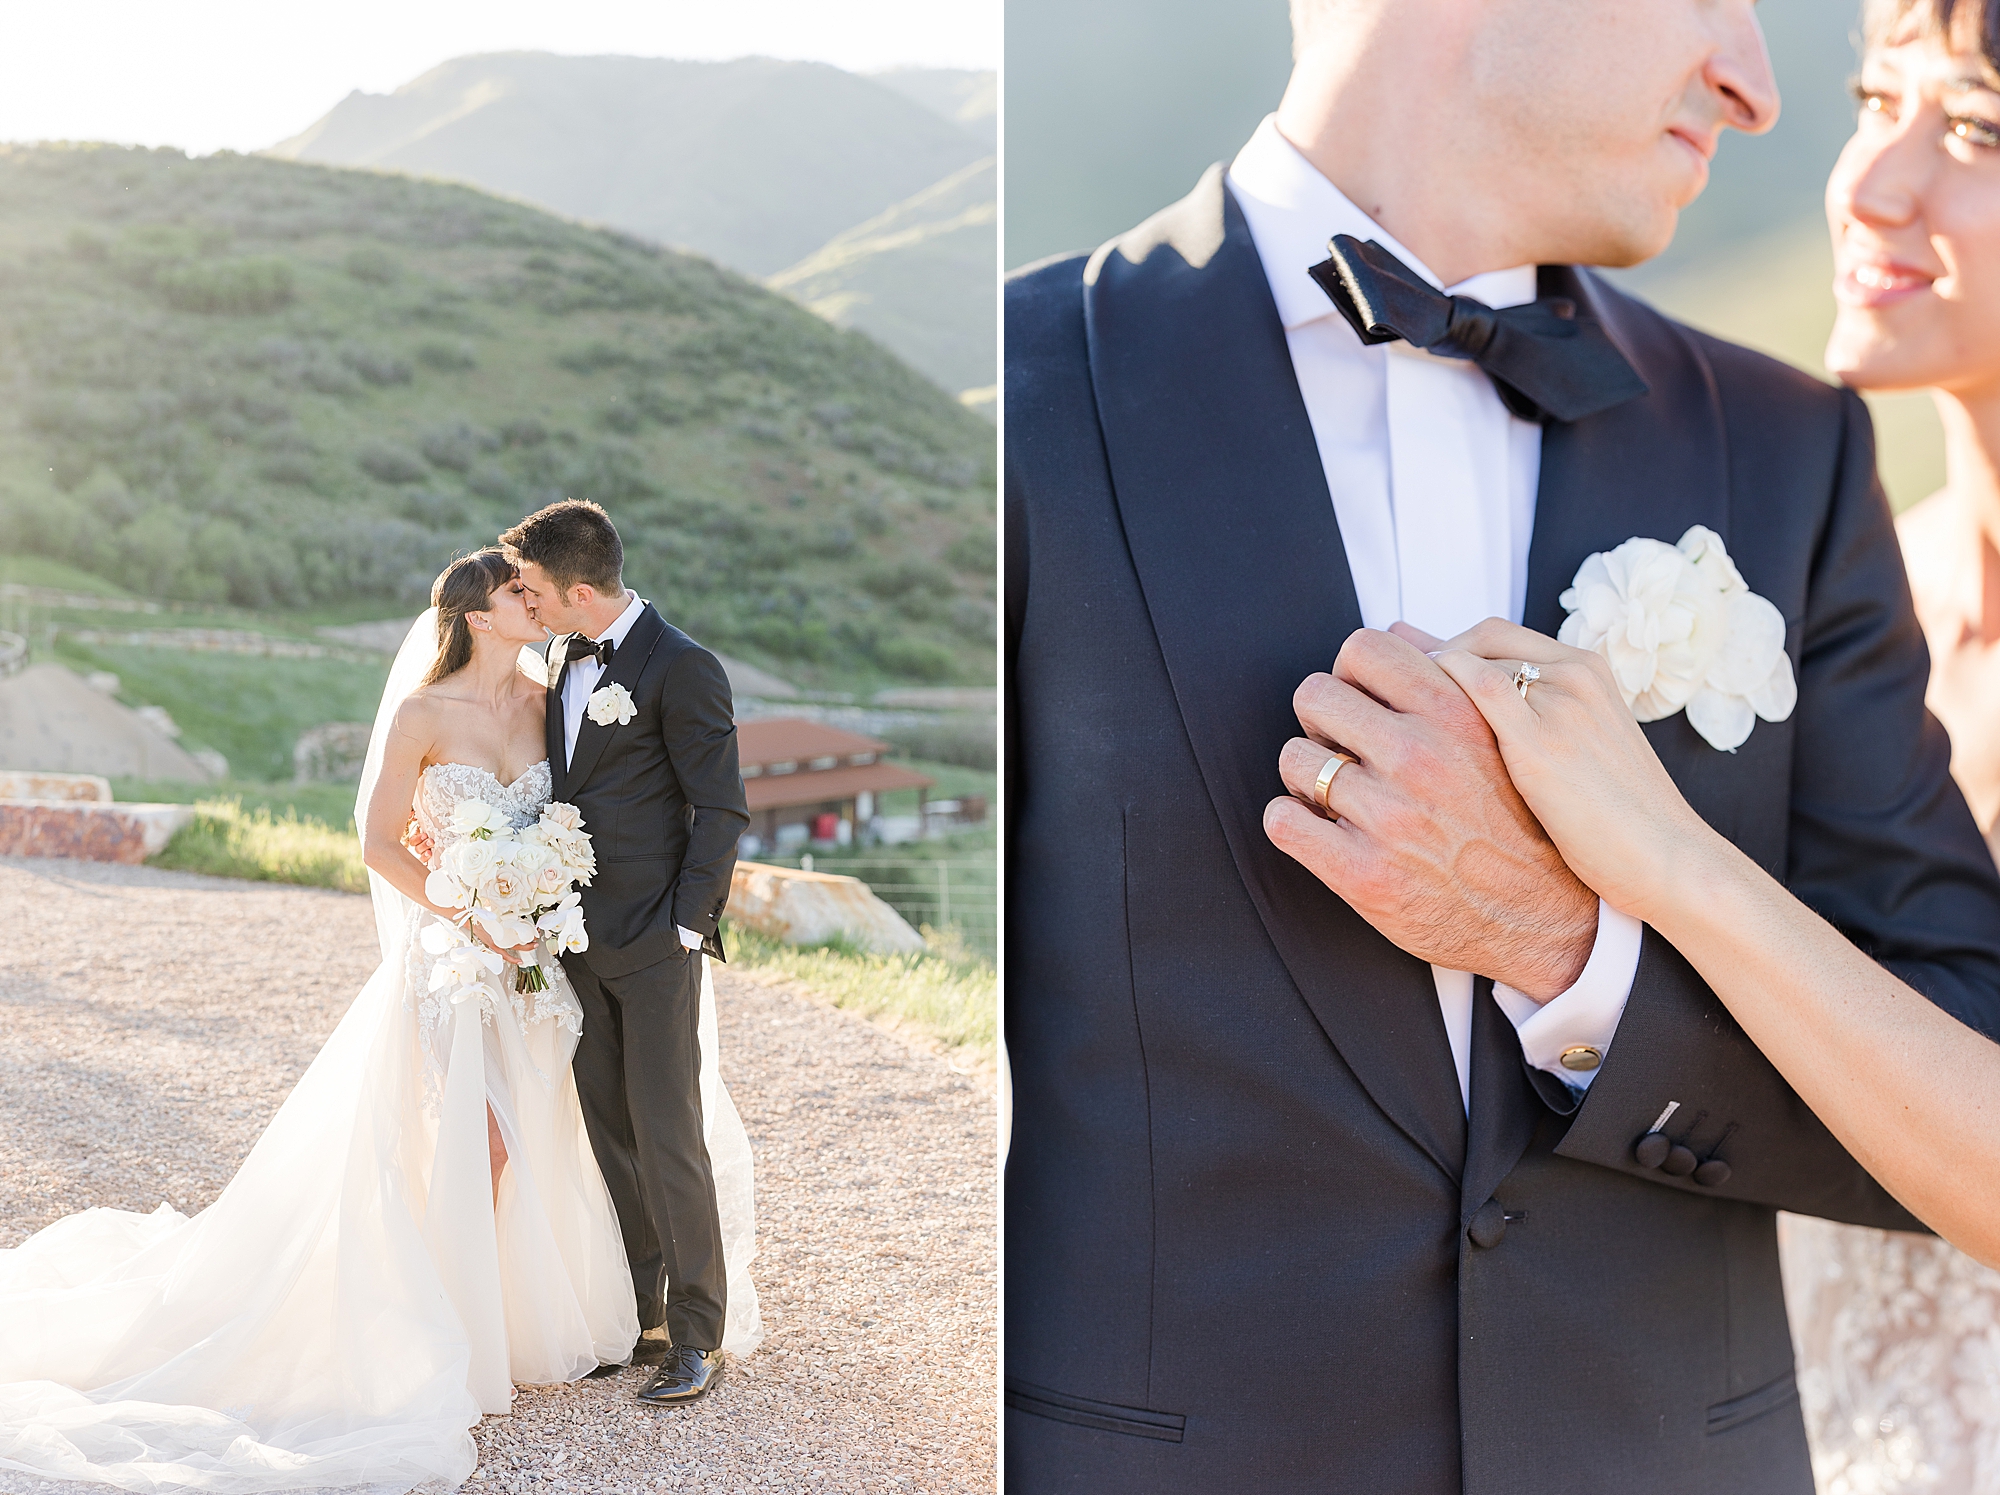 Sophisticated summer wedding in Park City